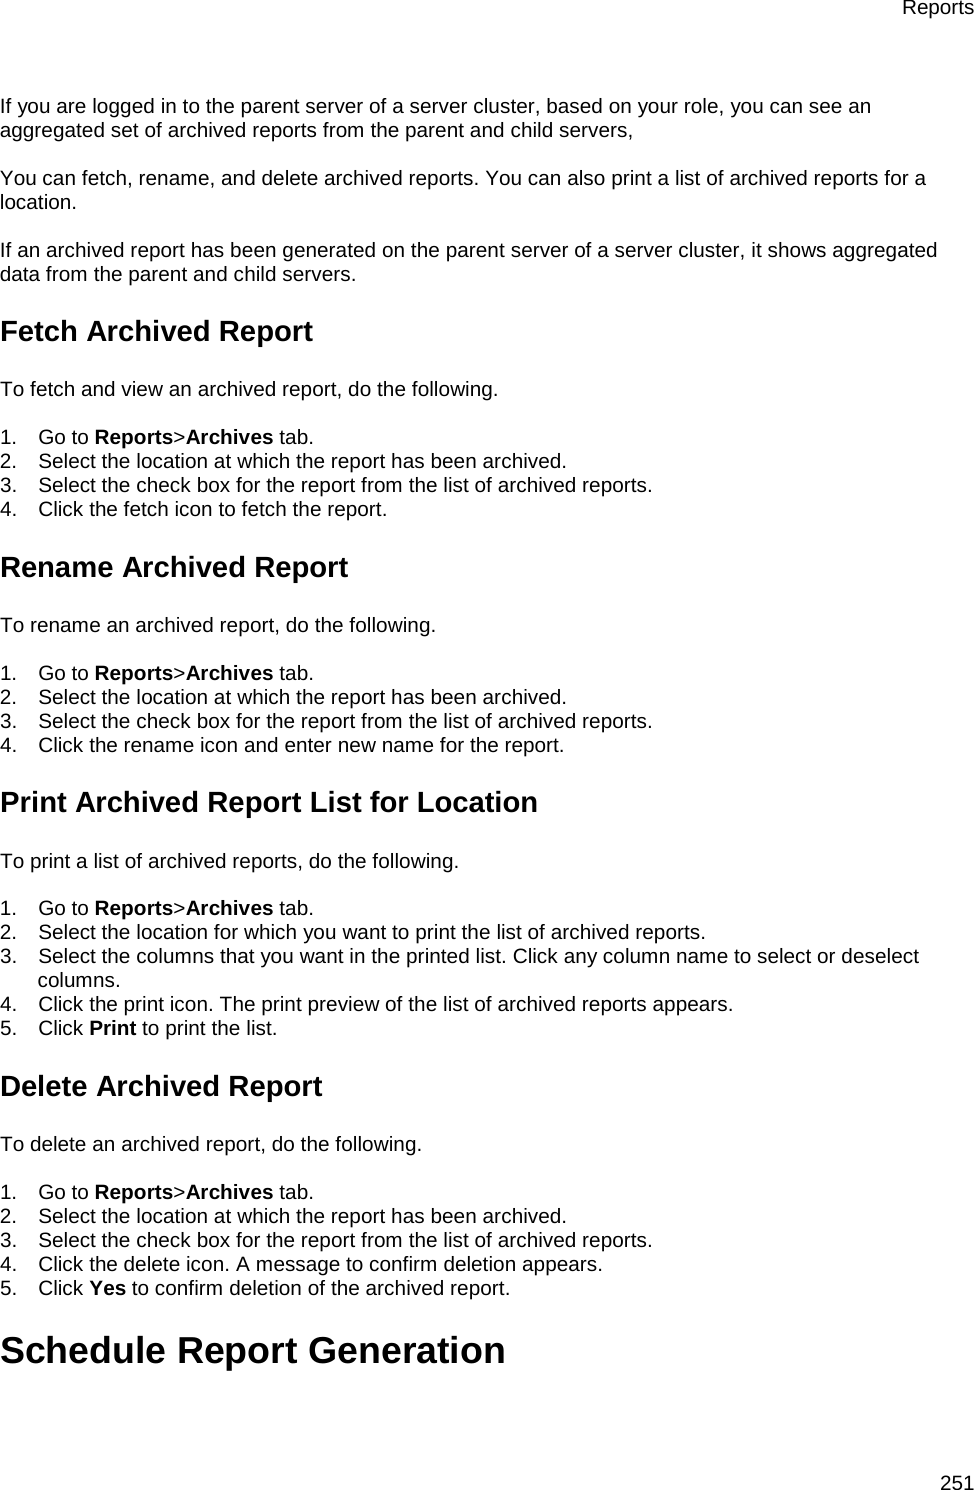 Reports 251   If you are logged in to the parent server of a server cluster, based on your role, you can see an aggregated set of archived reports from the parent and child servers,    You can fetch, rename, and delete archived reports. You can also print a list of archived reports for a location.   If an archived report has been generated on the parent server of a server cluster, it shows aggregated data from the parent and child servers. Fetch Archived Report To fetch and view an archived report, do the following.   1.      Go to Reports&gt;Archives tab. 2.      Select the location at which the report has been archived. 3.      Select the check box for the report from the list of archived reports. 4.      Click the fetch icon to fetch the report. Rename Archived Report To rename an archived report, do the following.   1.      Go to Reports&gt;Archives tab. 2.      Select the location at which the report has been archived. 3.      Select the check box for the report from the list of archived reports. 4.      Click the rename icon and enter new name for the report. Print Archived Report List for Location To print a list of archived reports, do the following.   1.      Go to Reports&gt;Archives tab. 2.      Select the location for which you want to print the list of archived reports. 3.      Select the columns that you want in the printed list. Click any column name to select or deselect columns. 4.      Click the print icon. The print preview of the list of archived reports appears. 5.      Click Print to print the list. Delete Archived Report To delete an archived report, do the following.   1.      Go to Reports&gt;Archives tab. 2.      Select the location at which the report has been archived. 3.      Select the check box for the report from the list of archived reports. 4.      Click the delete icon. A message to confirm deletion appears. 5.      Click Yes to confirm deletion of the archived report. Schedule Report Generation 